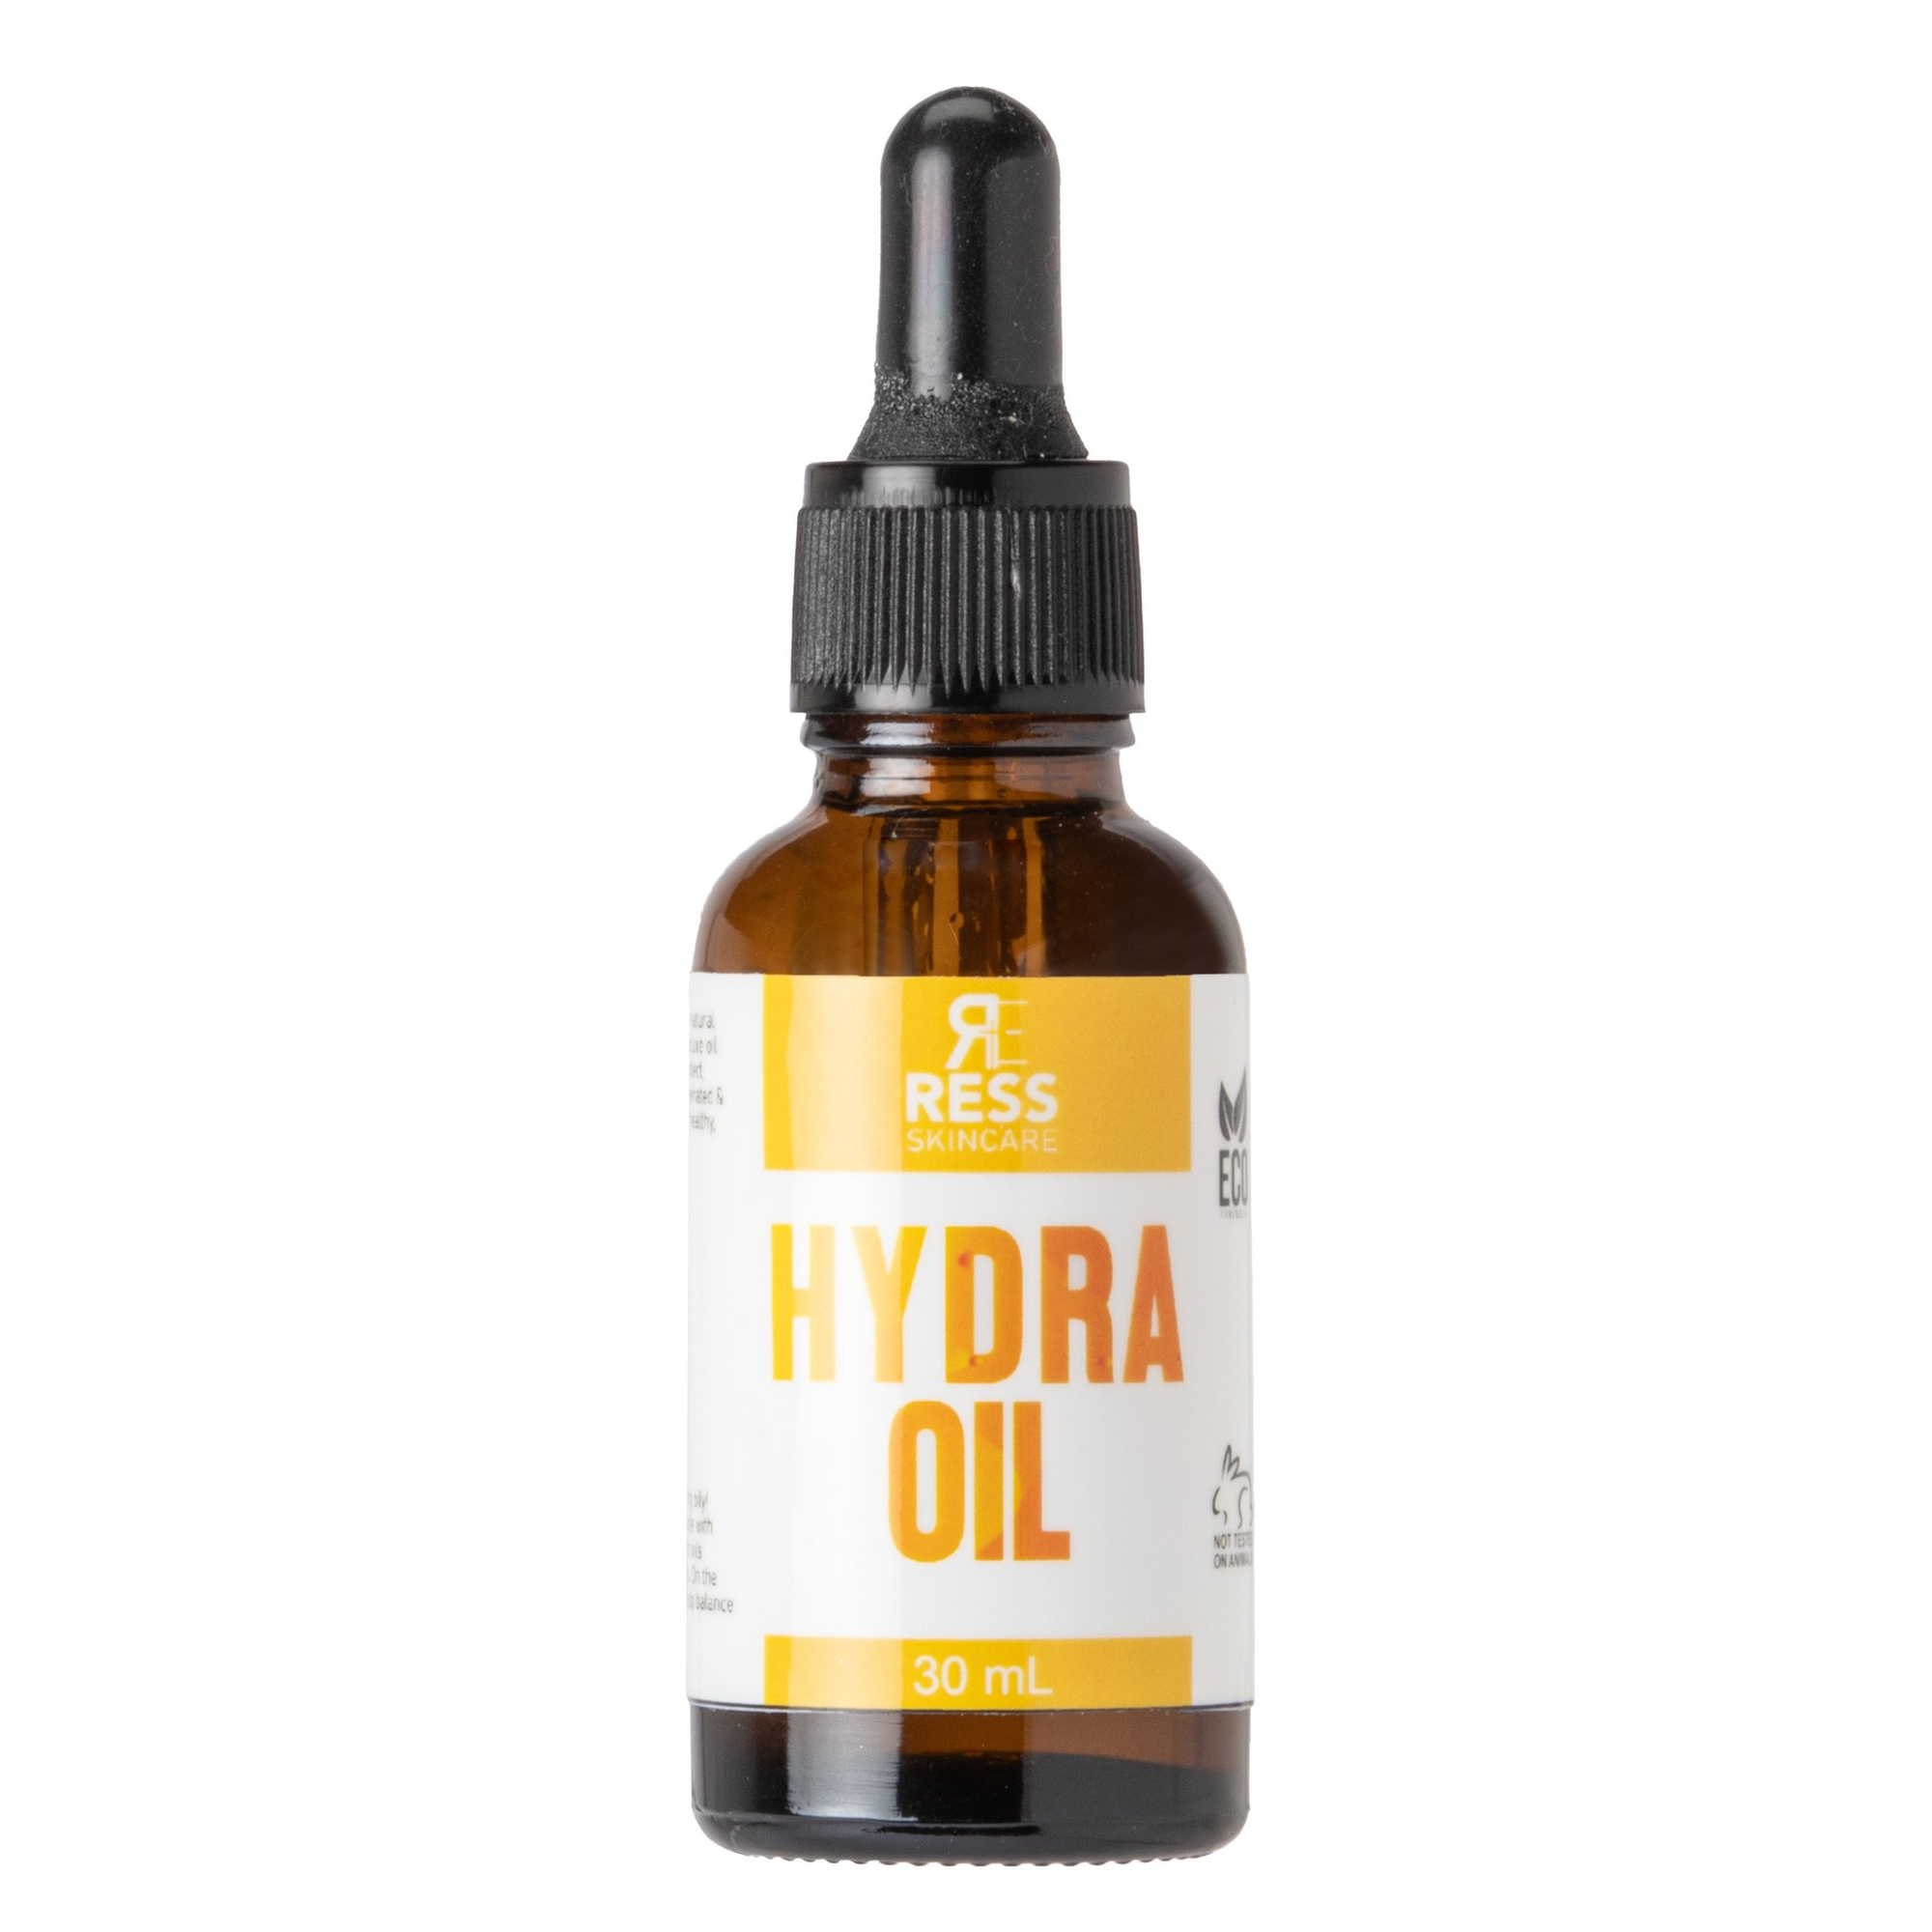 HydraOil | Rose Hip and Argan Oils | All Natural